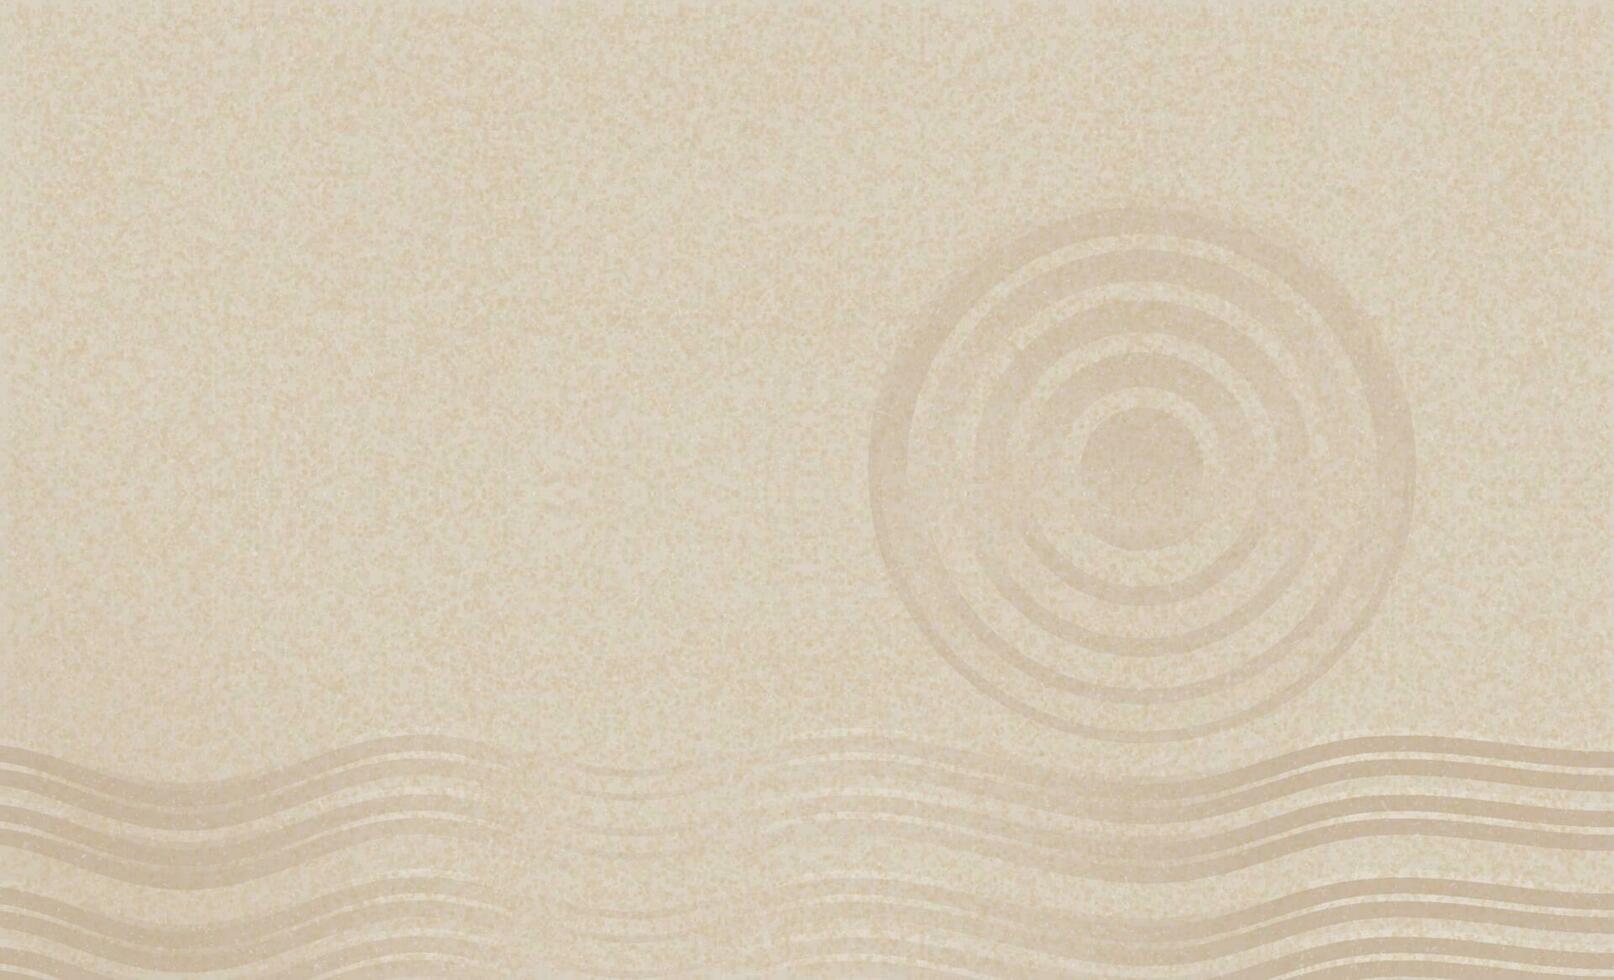 Sand beach texture with simple spiritual patterns in Japanese Zen Garden with concentric circles and parallel lines raked on smooth sandy surface background,Harmony,Meditation,Zen like concept vector